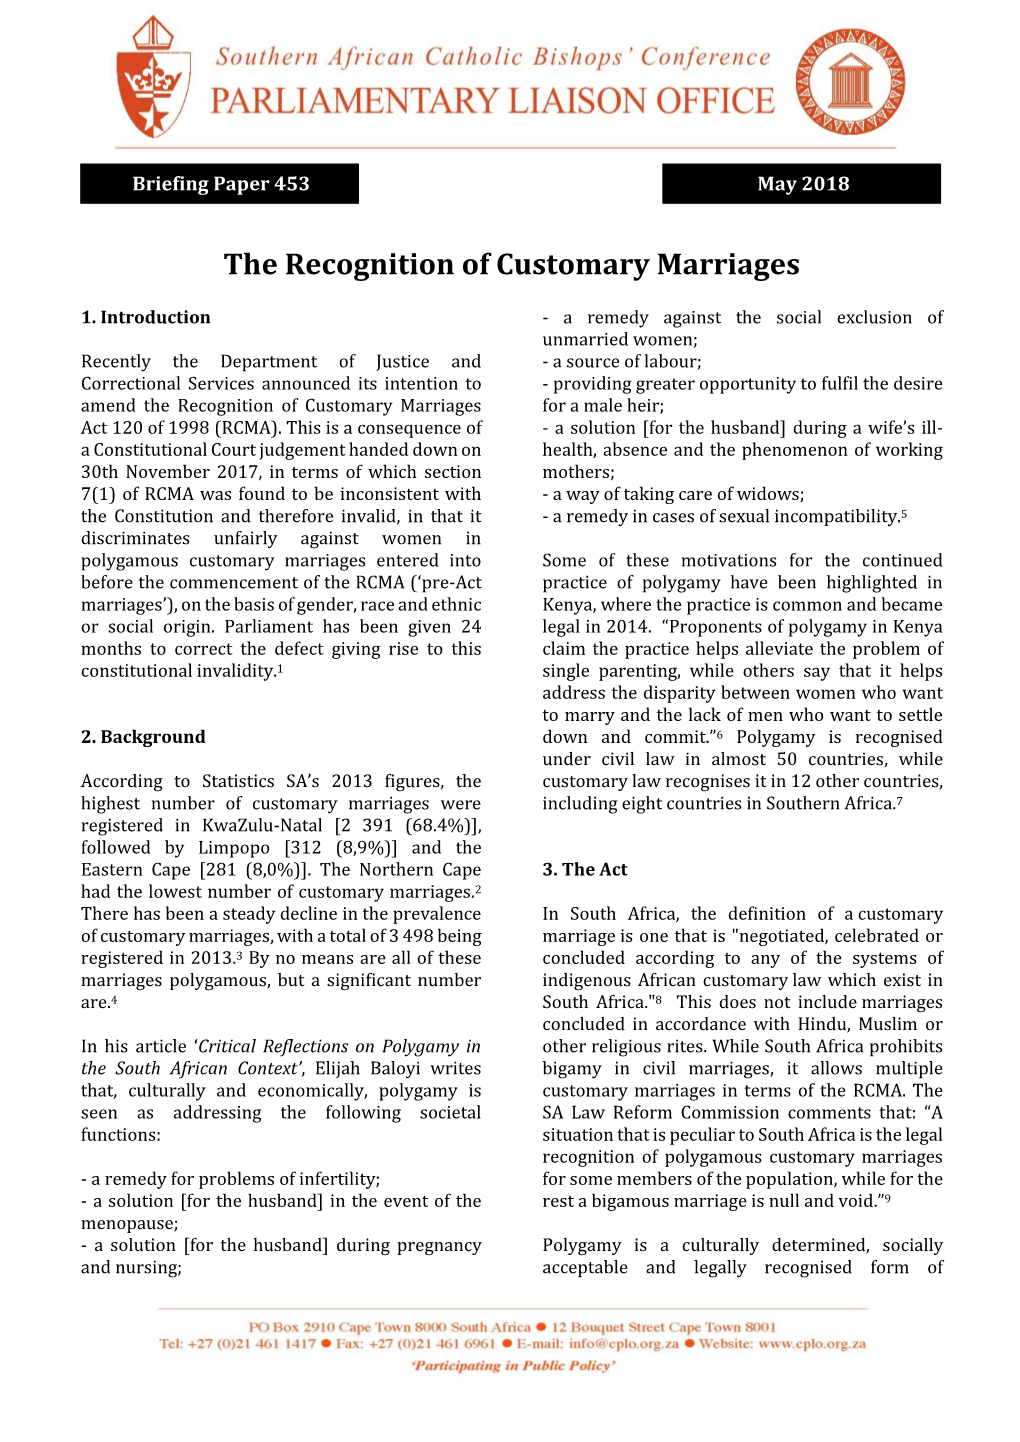 The Recognition of Customary Marriages